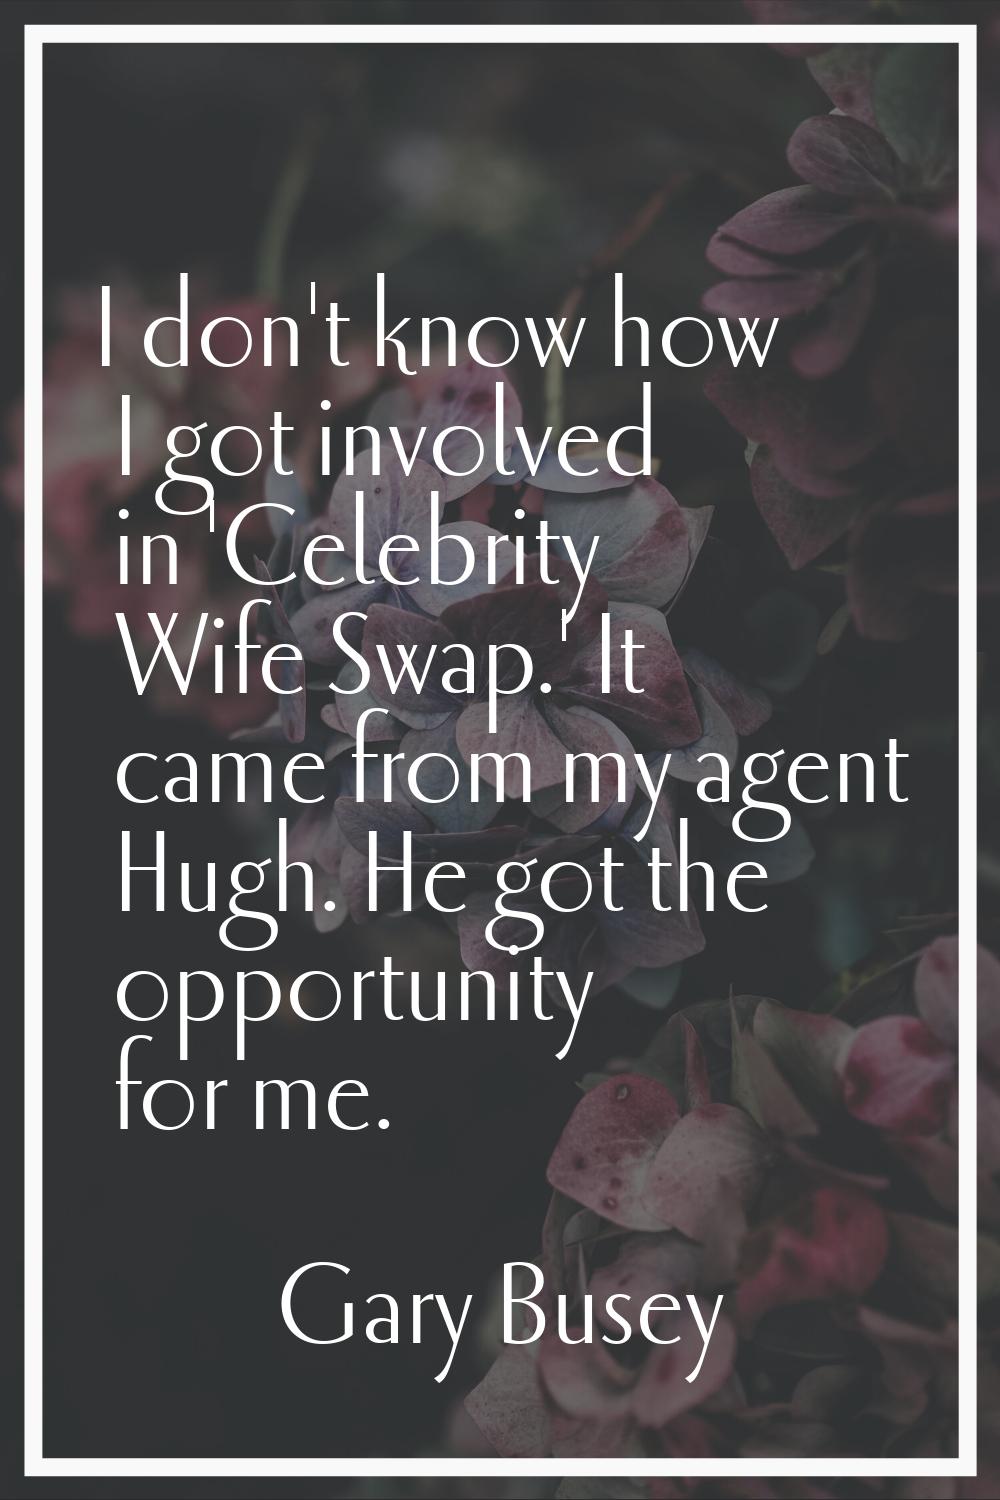 I don't know how I got involved in 'Celebrity Wife Swap.' It came from my agent Hugh. He got the op